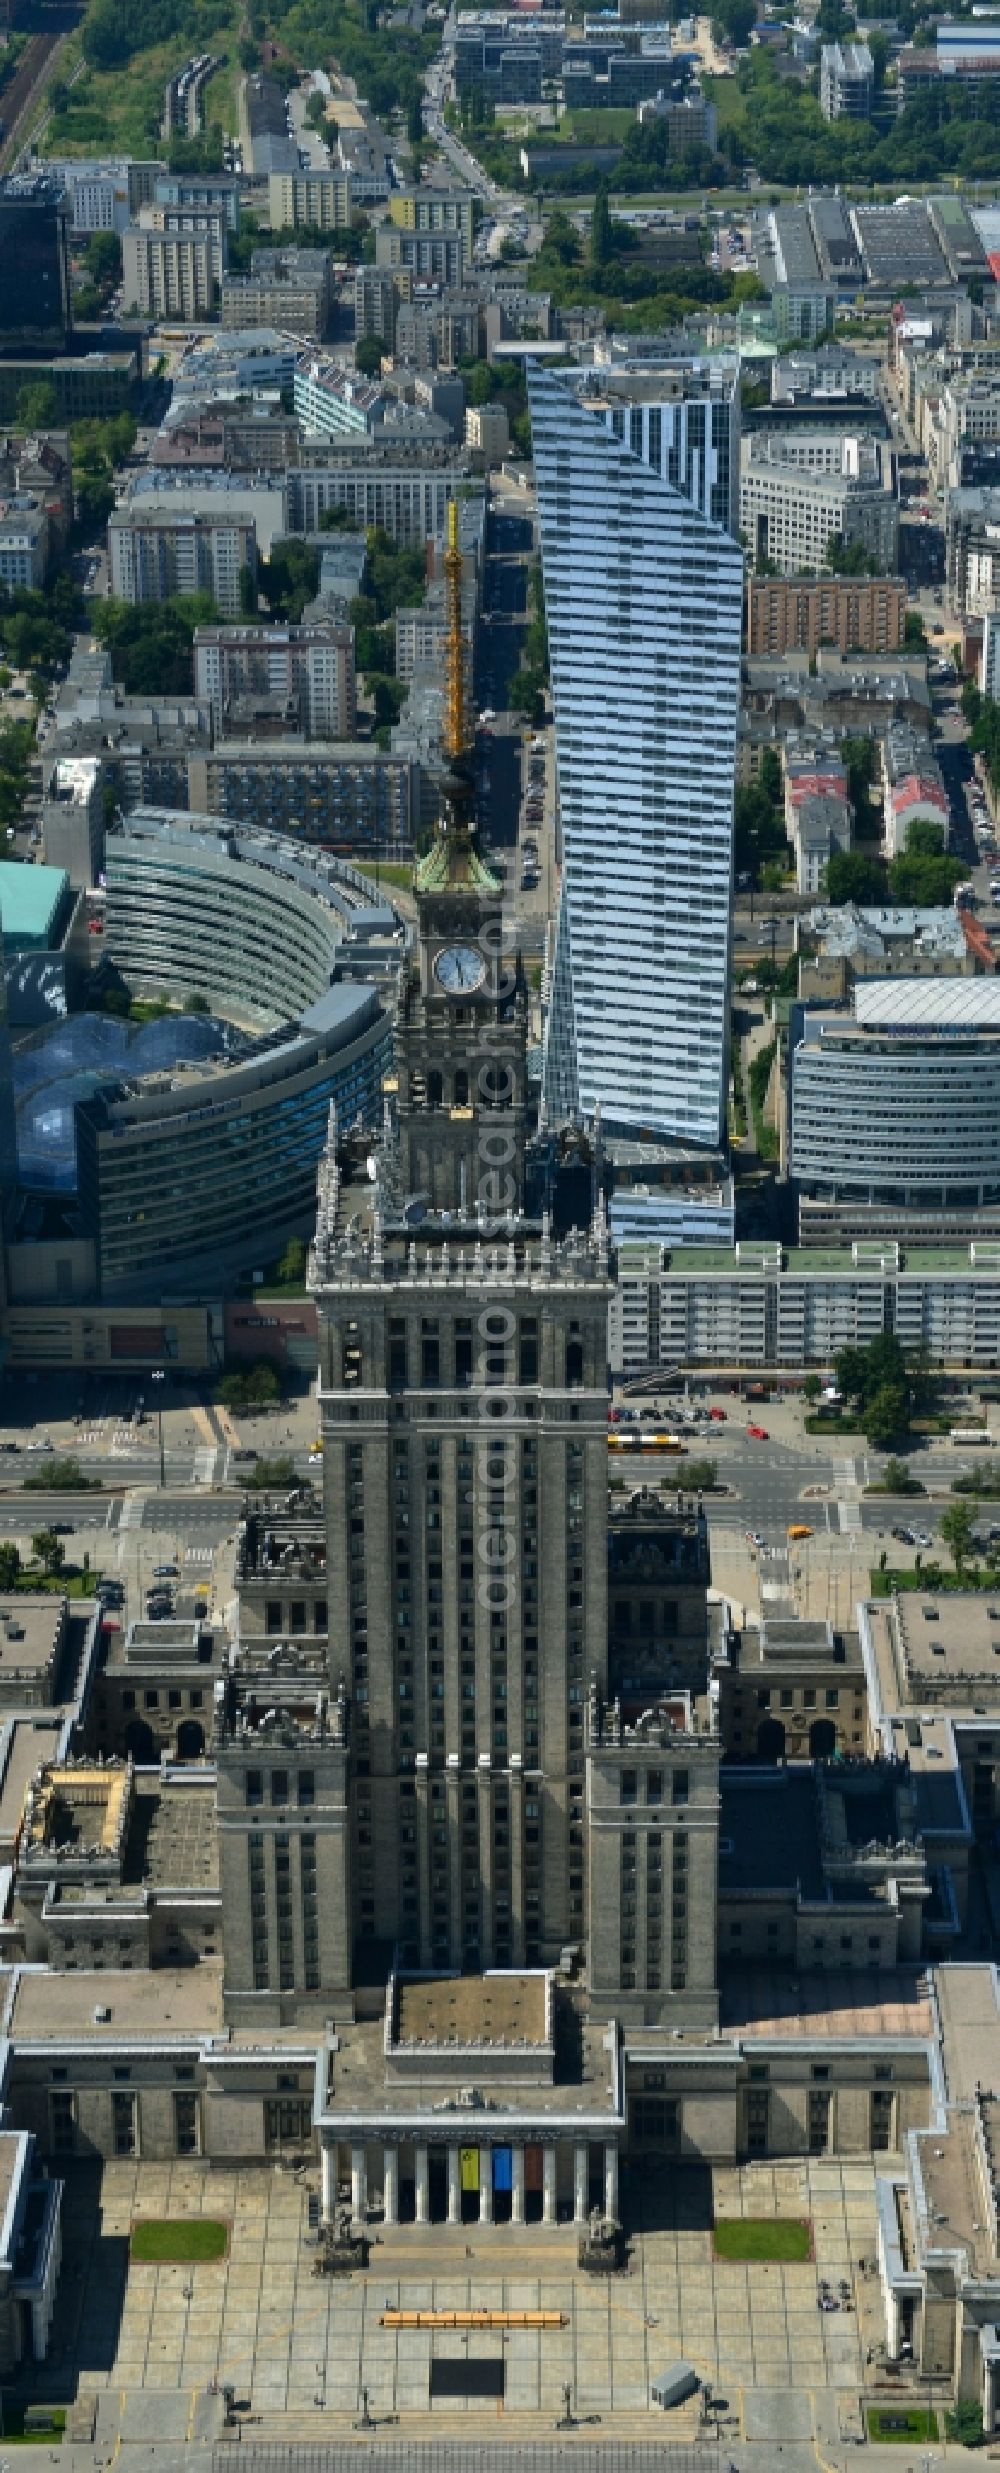 Aerial image Warschau - View on the landmark in the city center, the high-rise building complex of the Palace of Culture and Science (Palac Kultury i Nauki Polish) in Warsaw in Poland